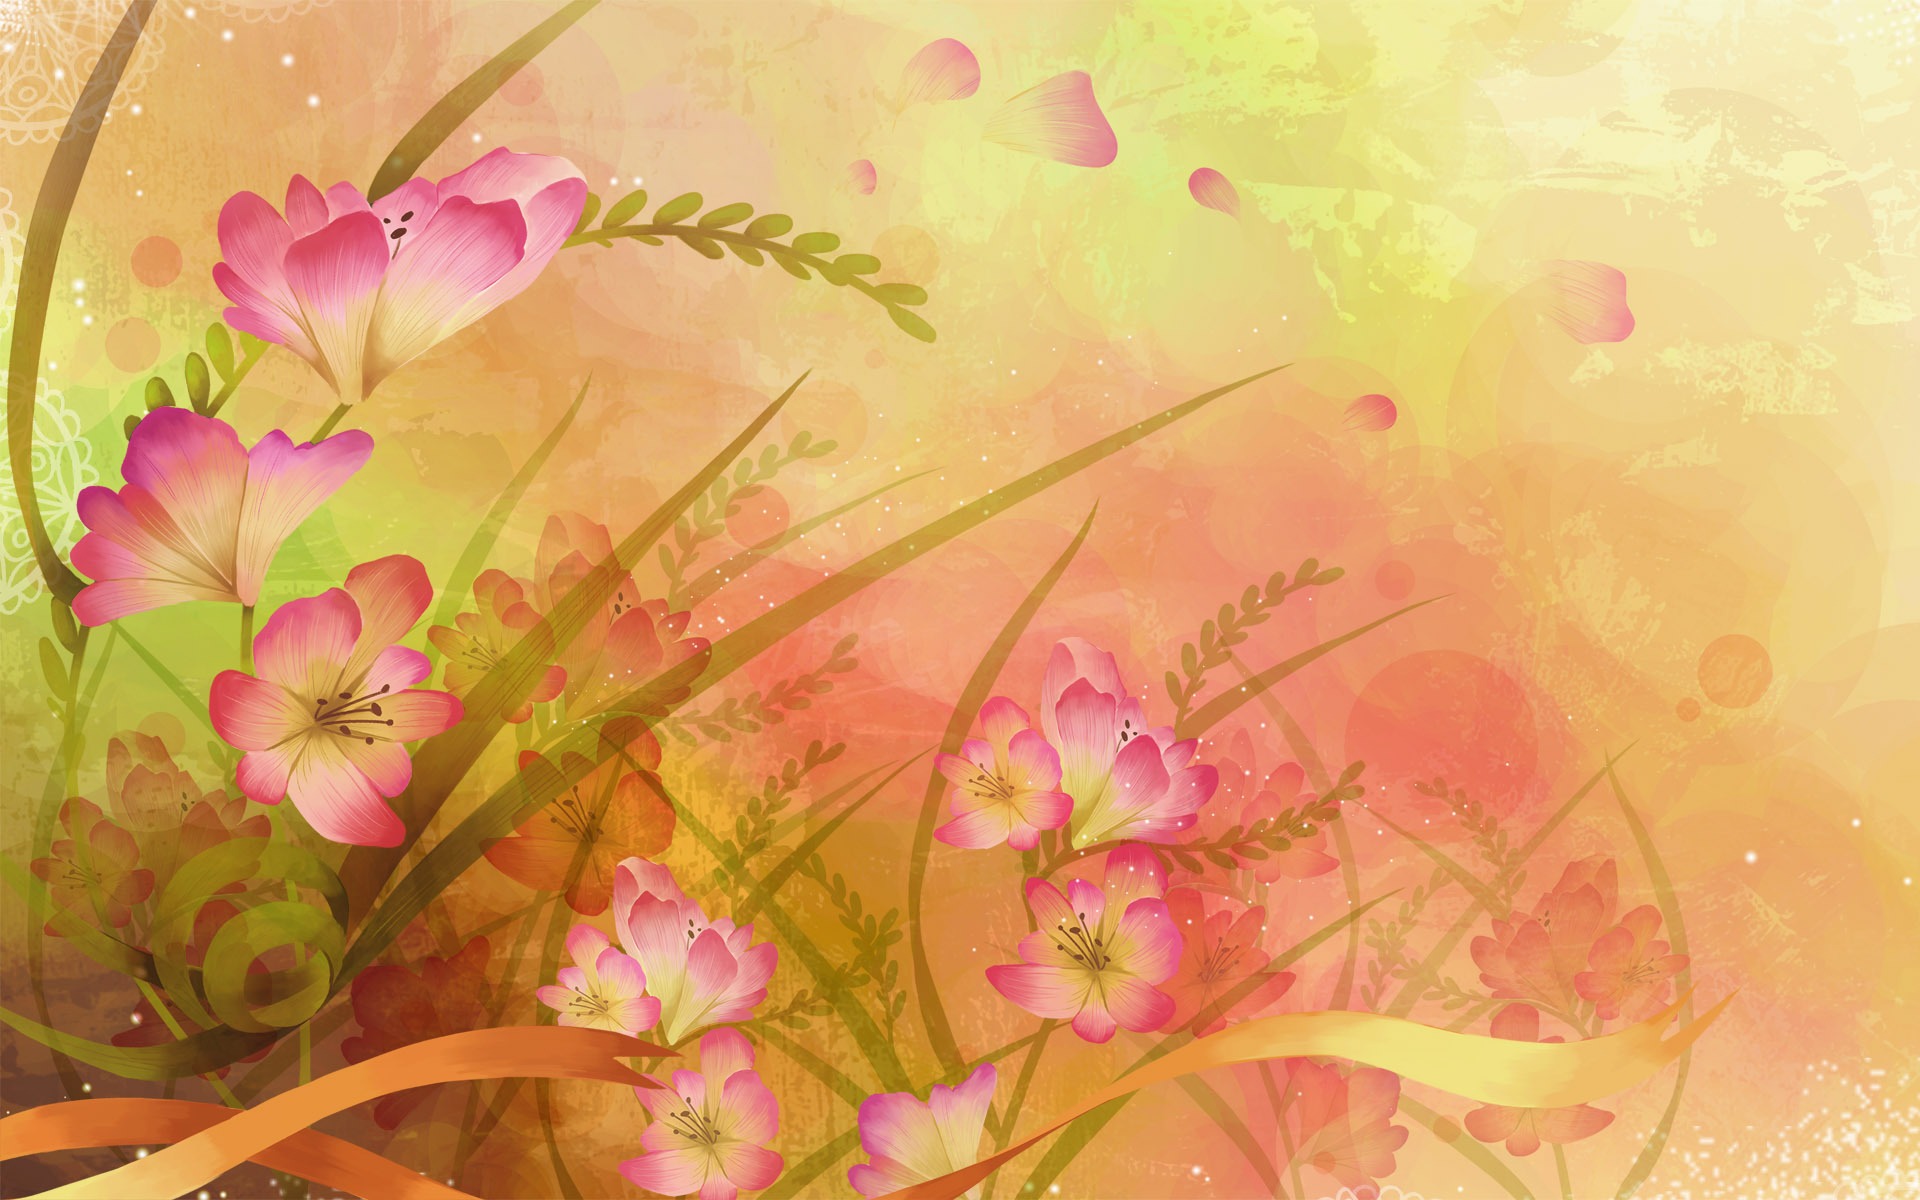 Synthetic Wallpaper Colorful Flower #40 - 1920x1200